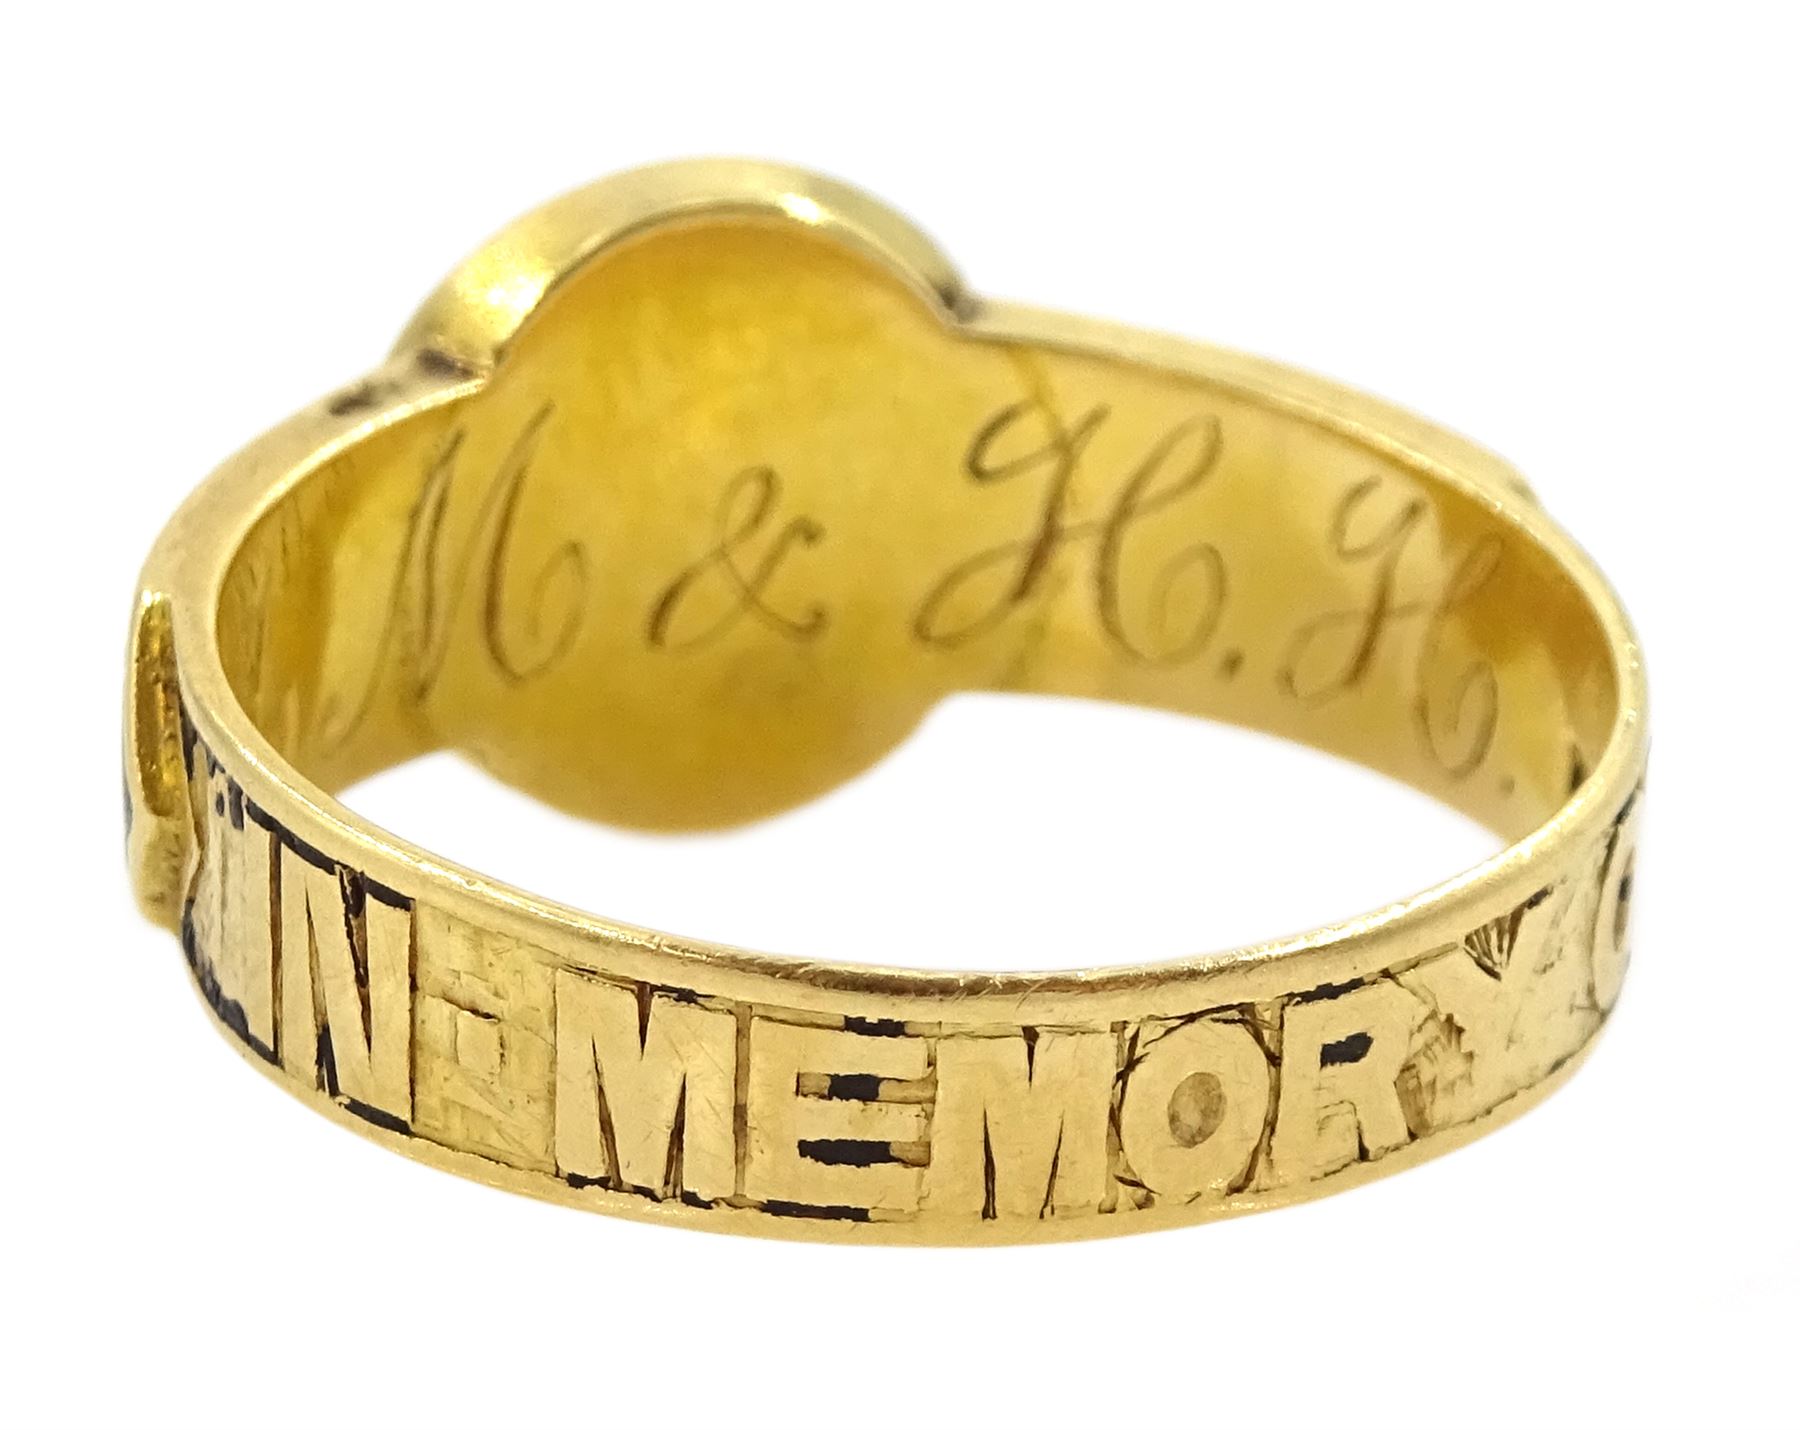 Victorian 18ct gold 'In Memory Of' memorial ring - Image 4 of 5